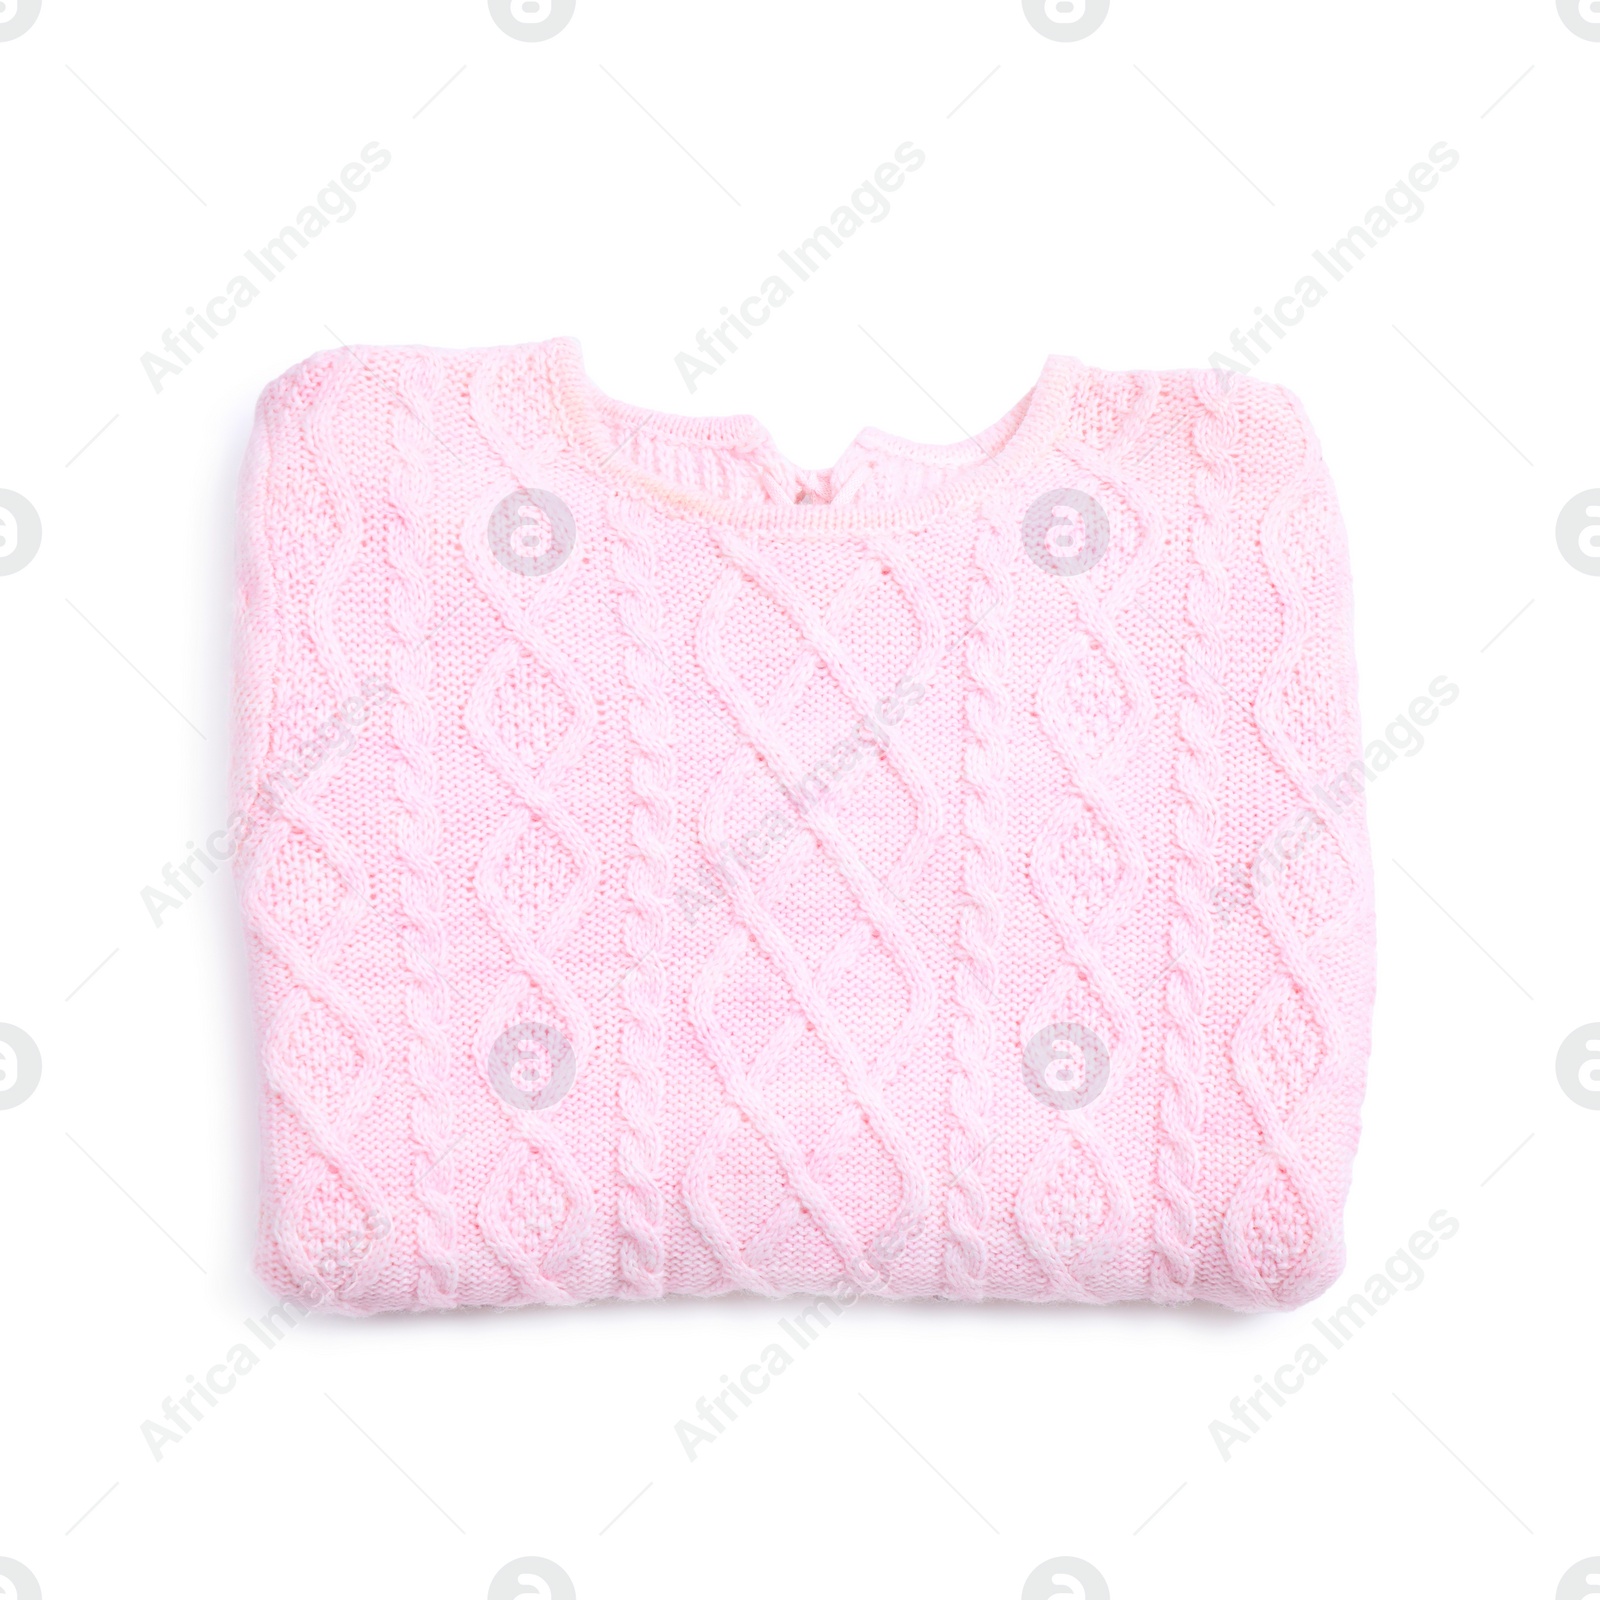 Photo of Folded pink knitted sweater on white background, top view